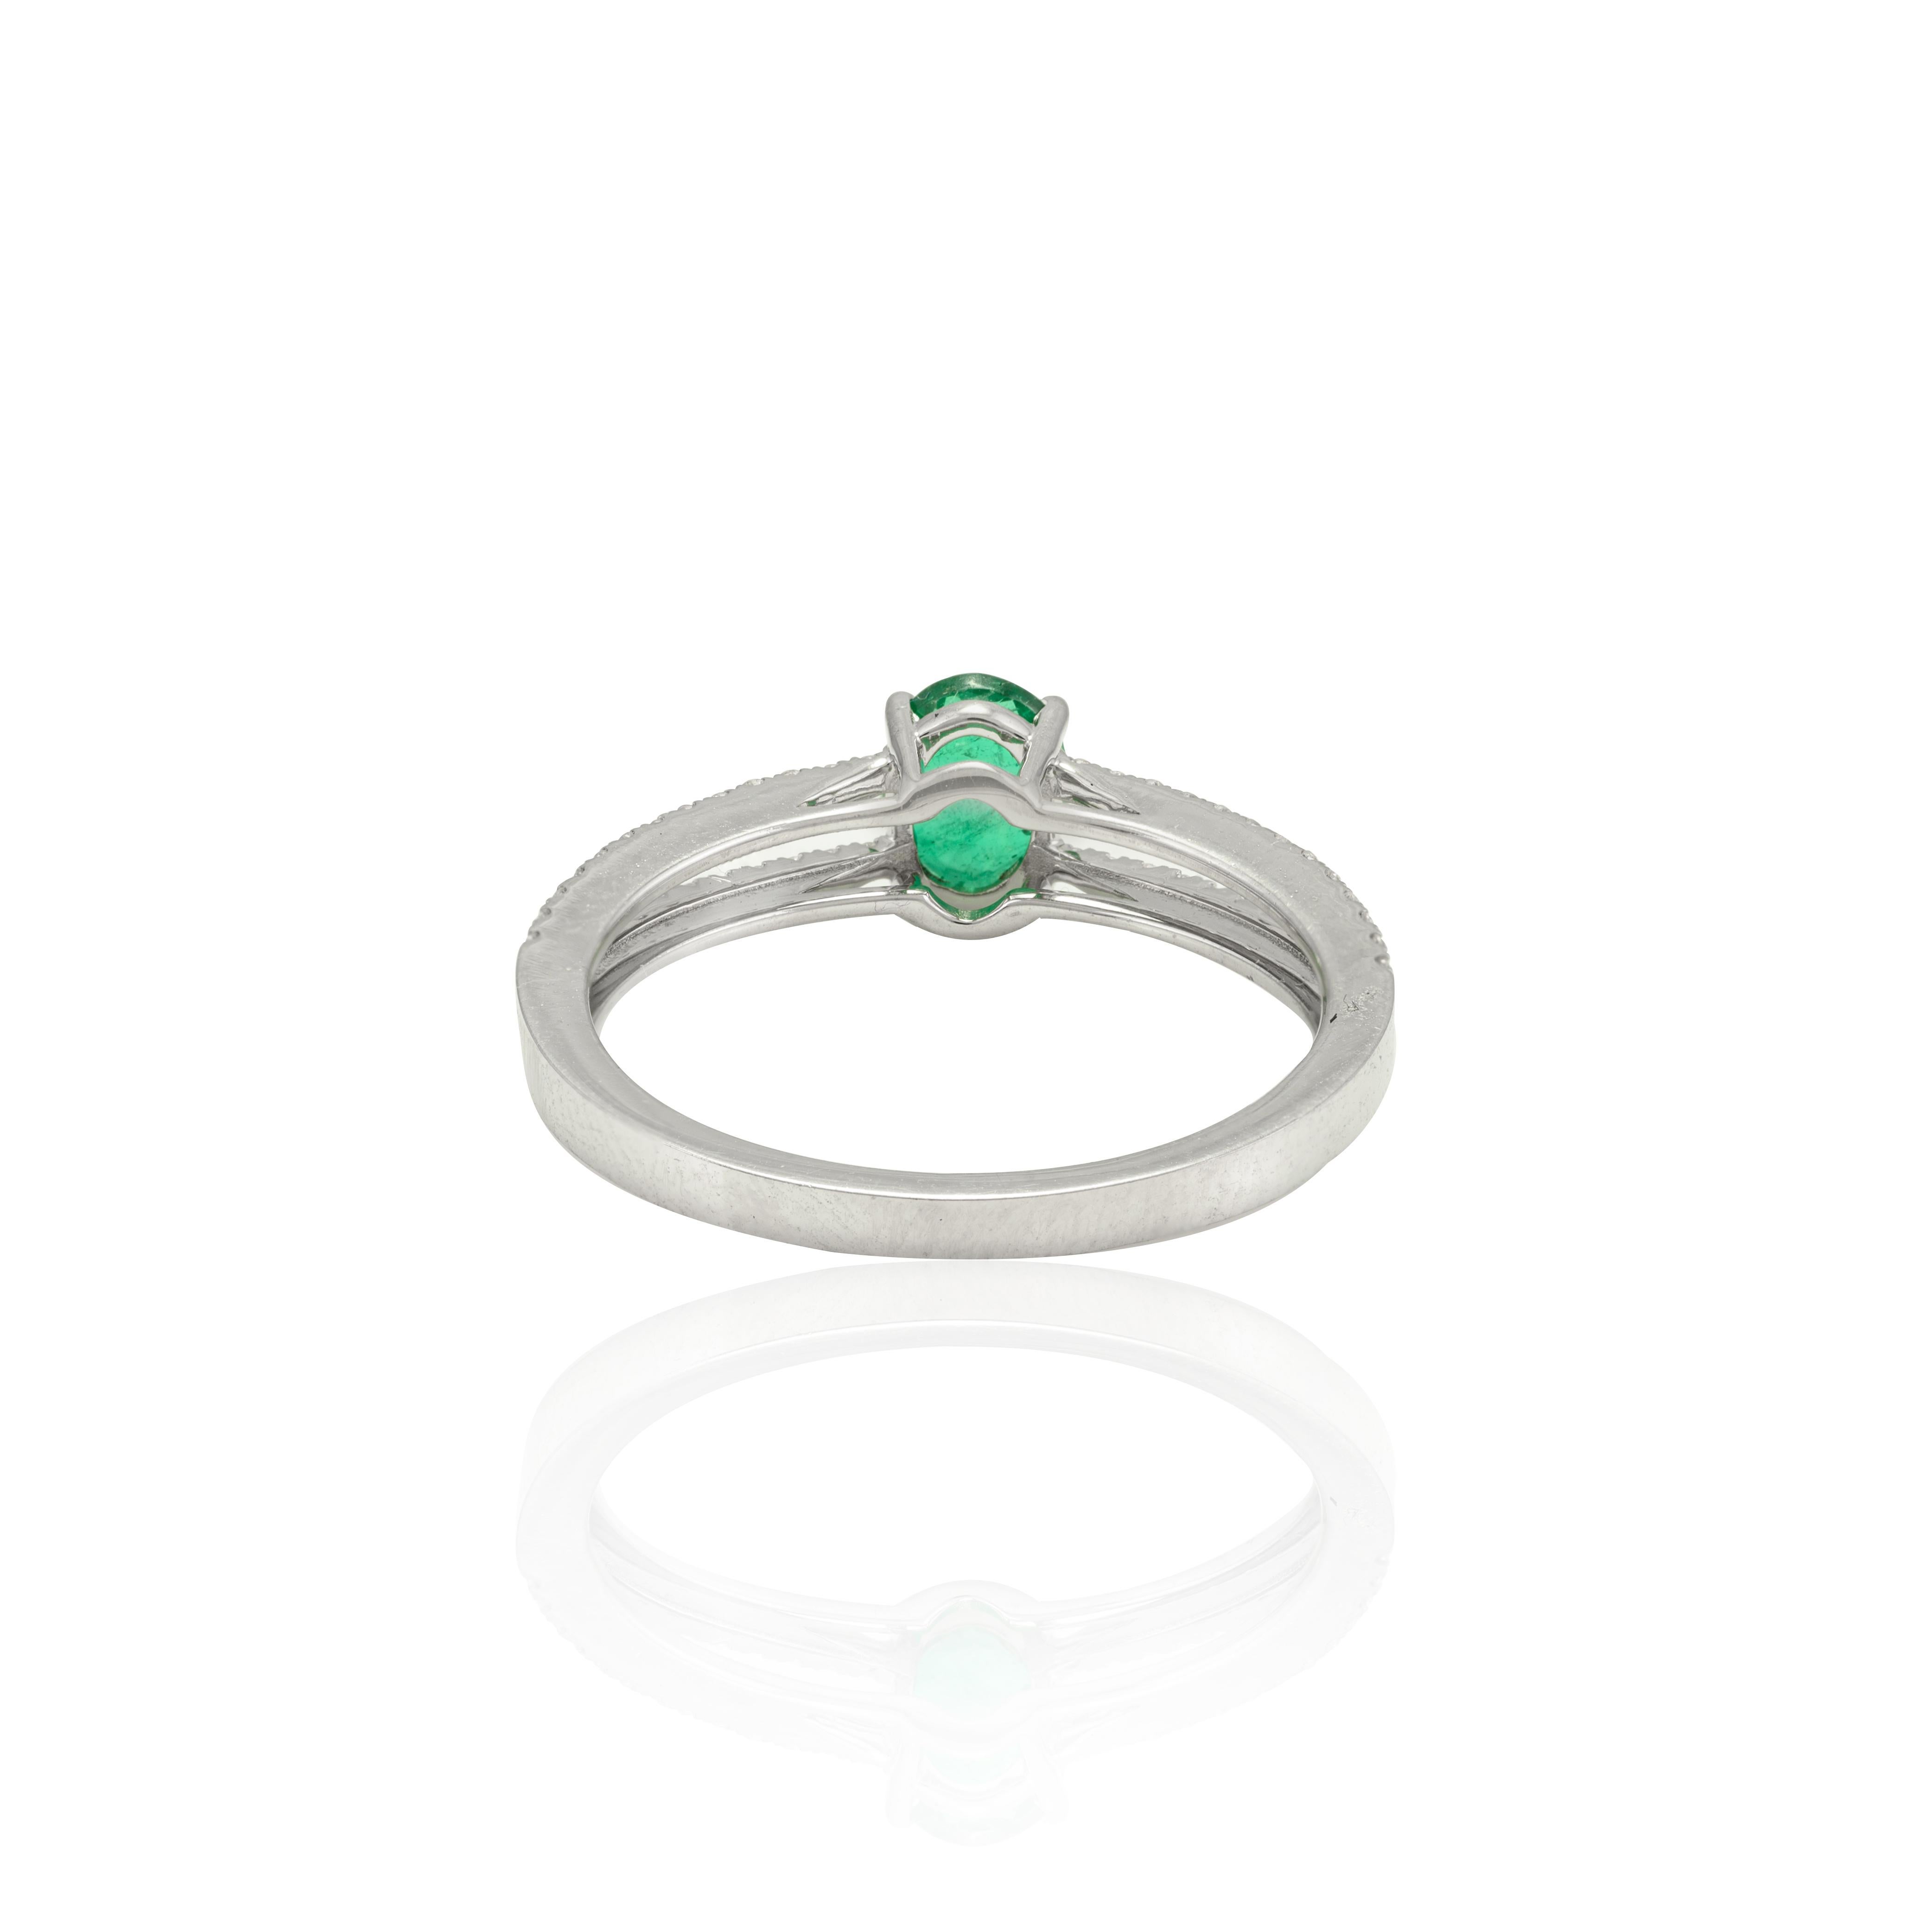 For Sale:  Genuine Oval Cut Emerald and Diamond Ring in Solid 18k White Gold 3